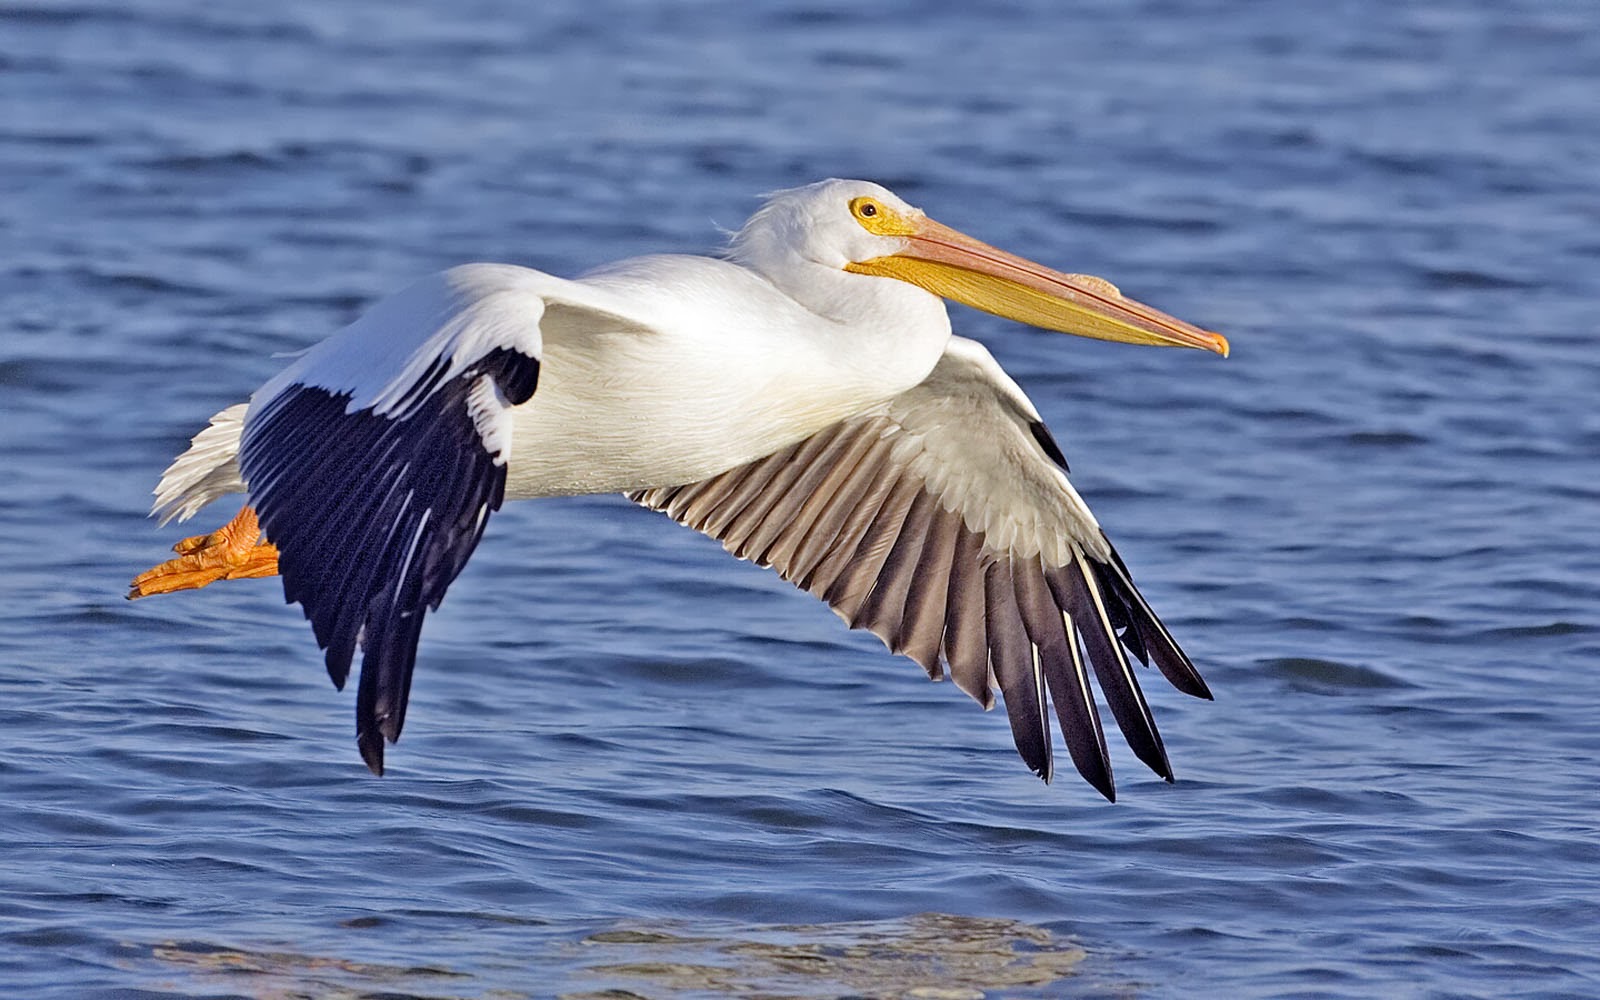 Tag American White Pelican Wallpaper Background Photos Image